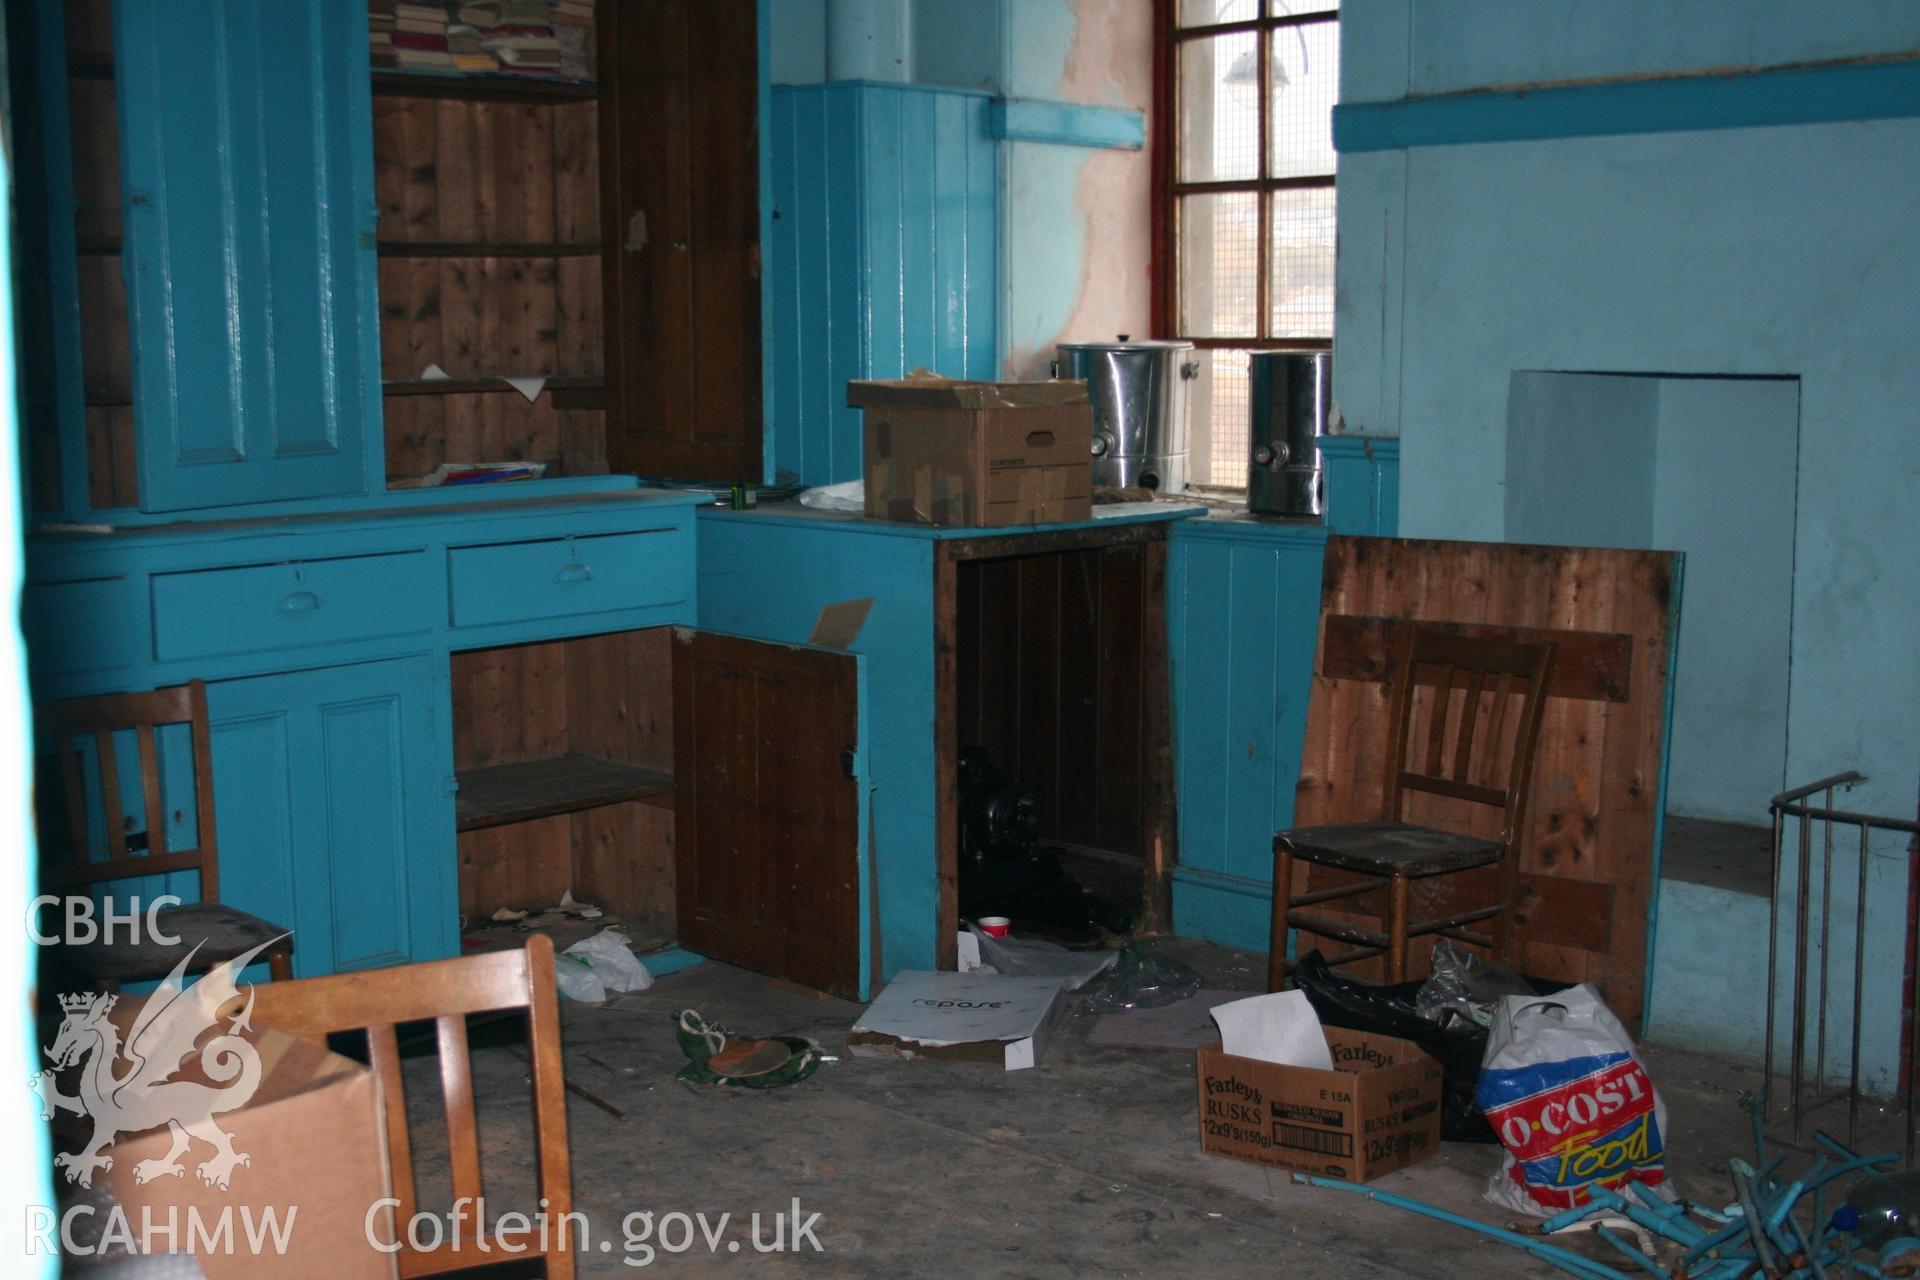 Hanbury Road baptist chapel, Bargoed, digital colour photograph showing interior - kitchen, received in the course of Emergency Recording case ref no RCS2/1/2247.